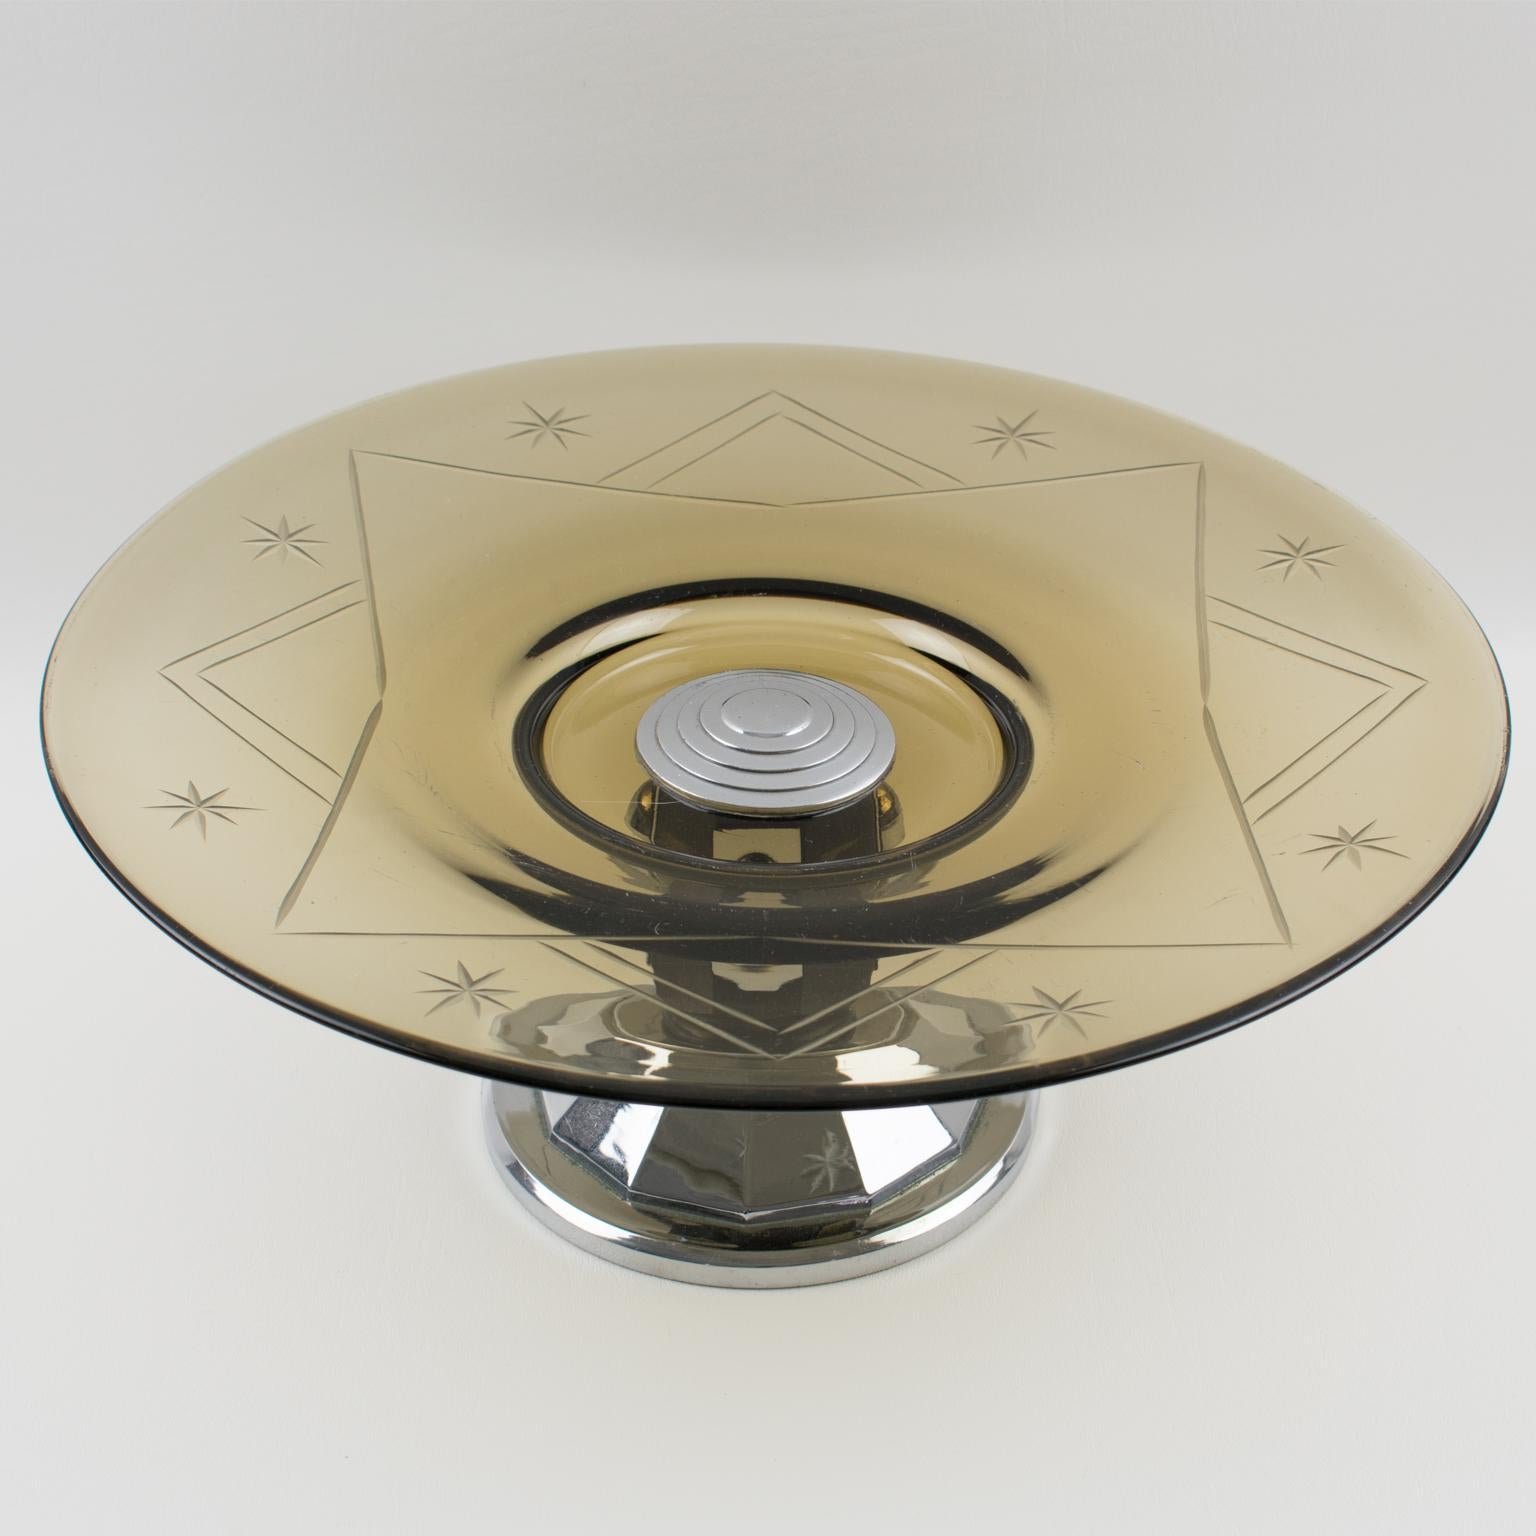 French Art Deco Glass, Macassar Wood and Chrome Centerpiece Bowl, France 1930s For Sale